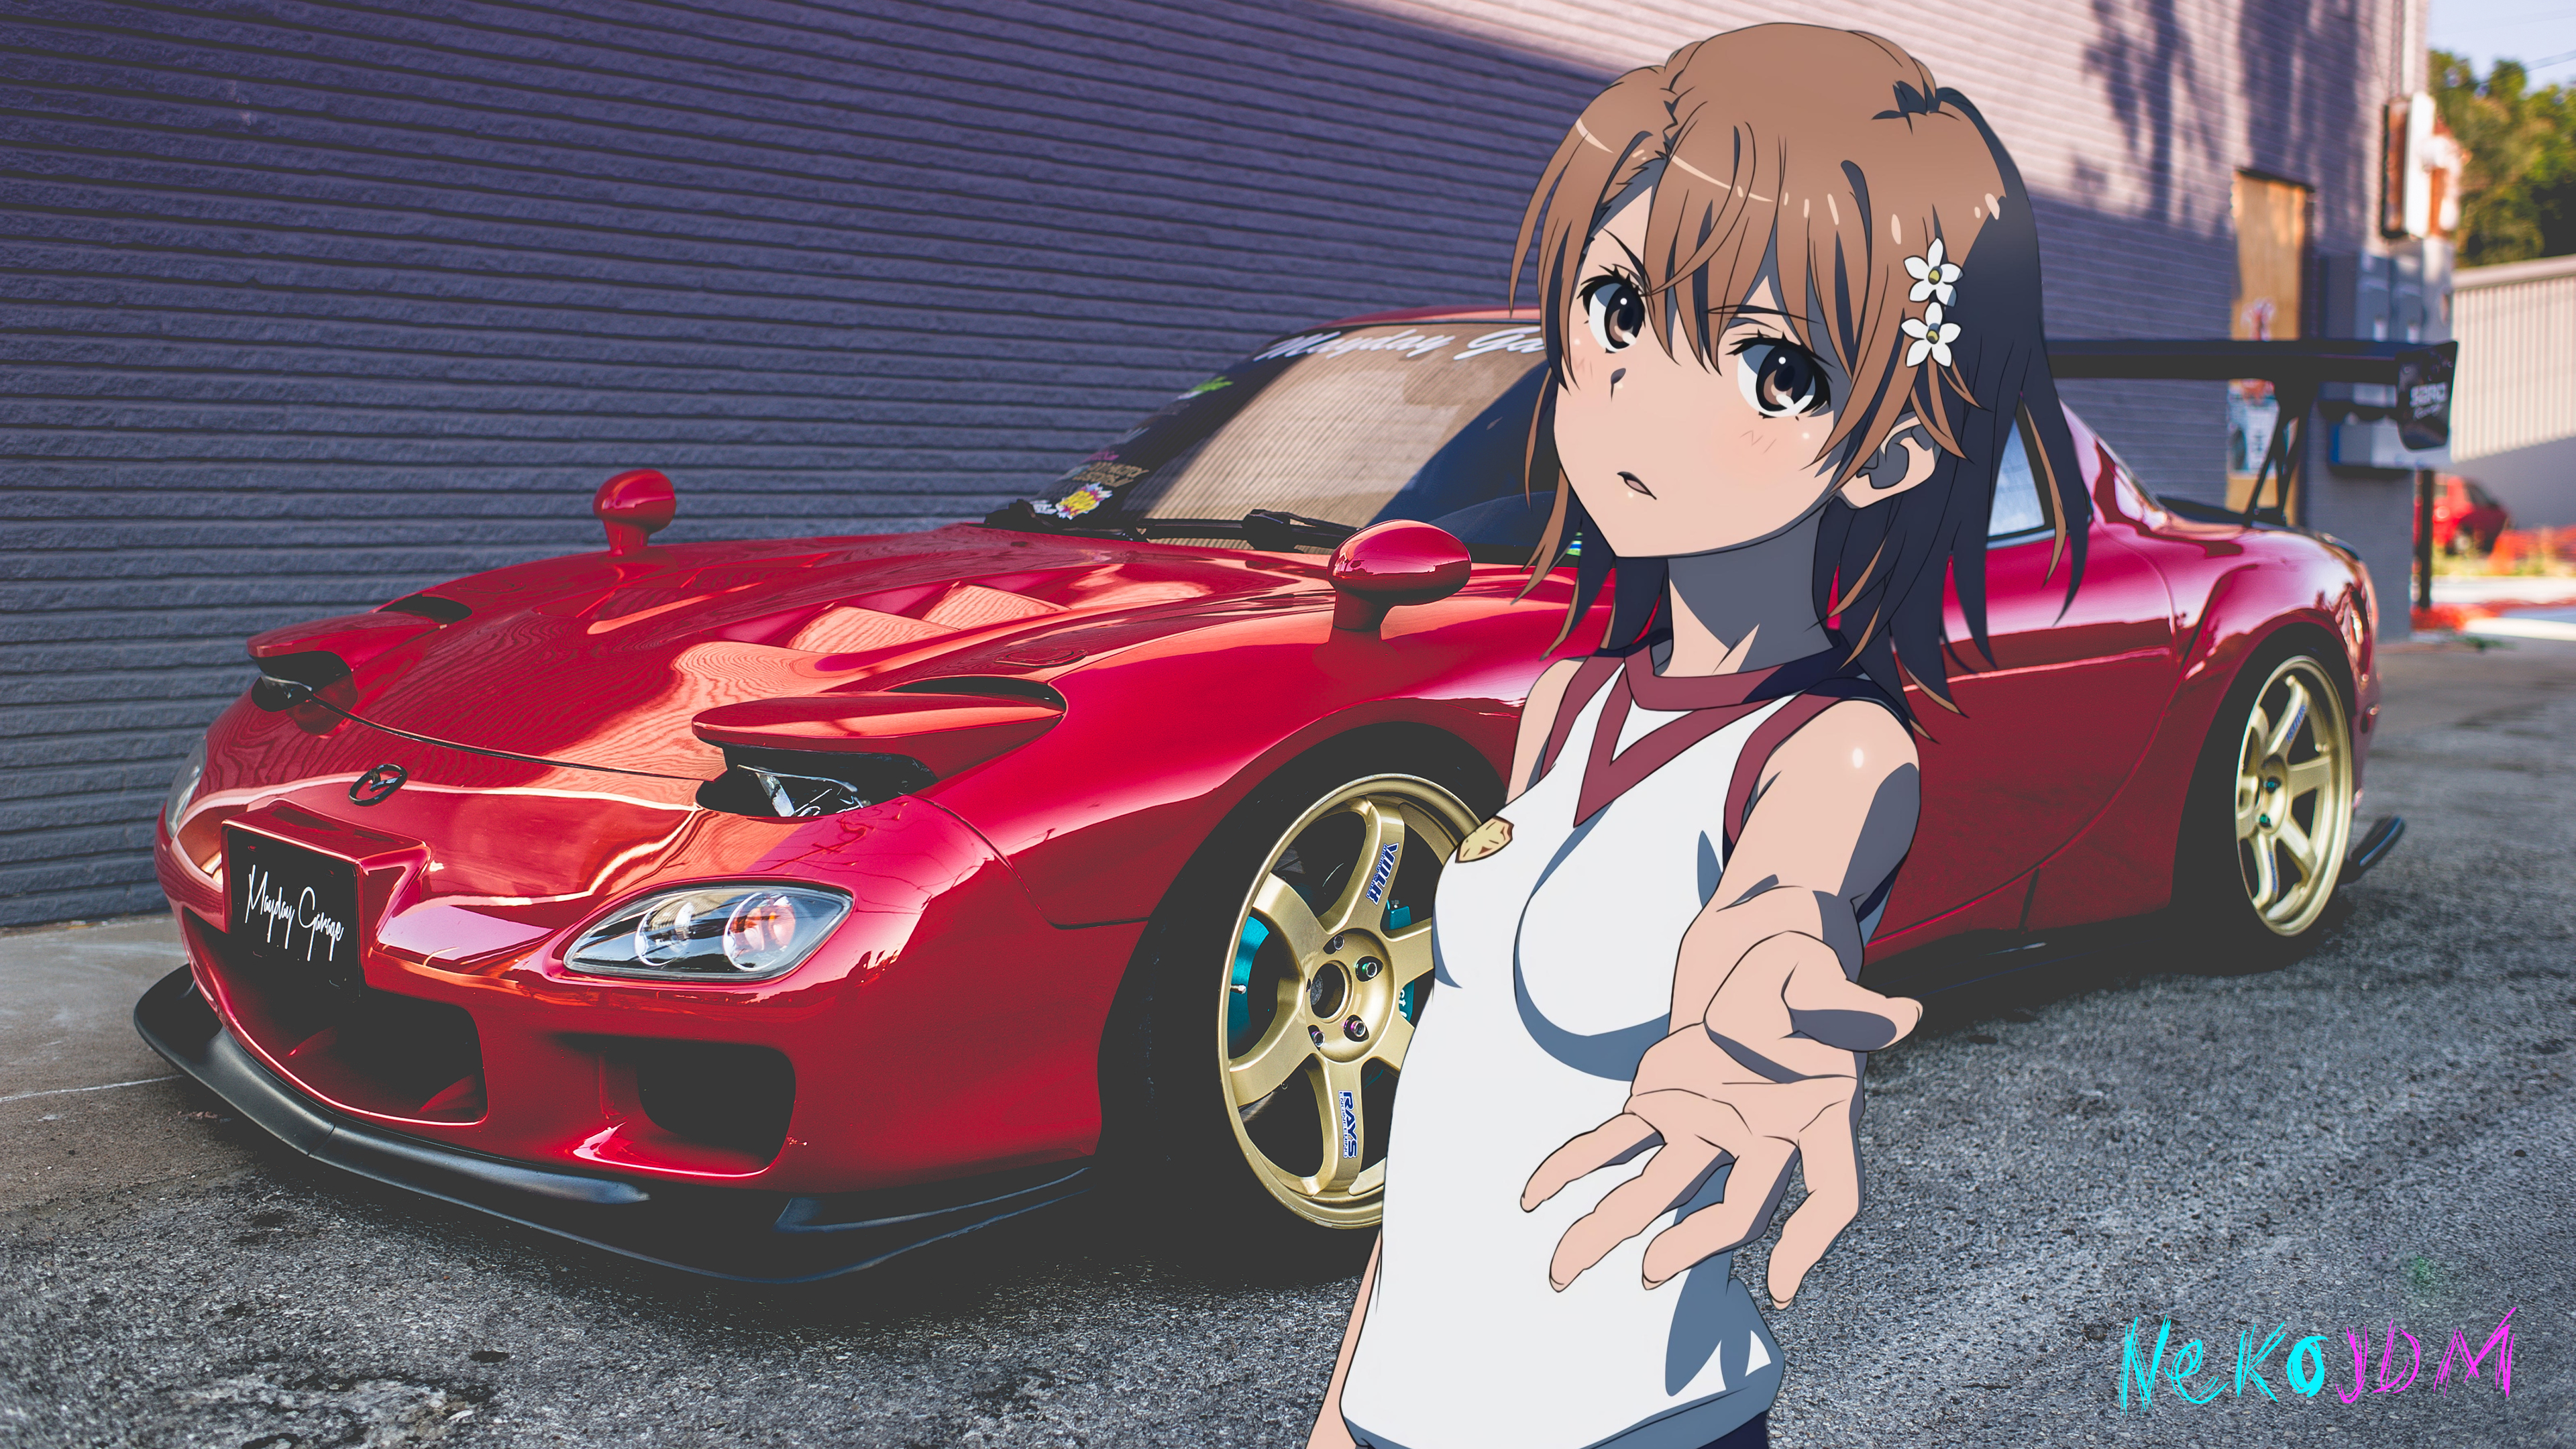 400HP Mazda FD RX-7 Widebody | Anime-Inspired For The JDM Touge Life -  YouTube